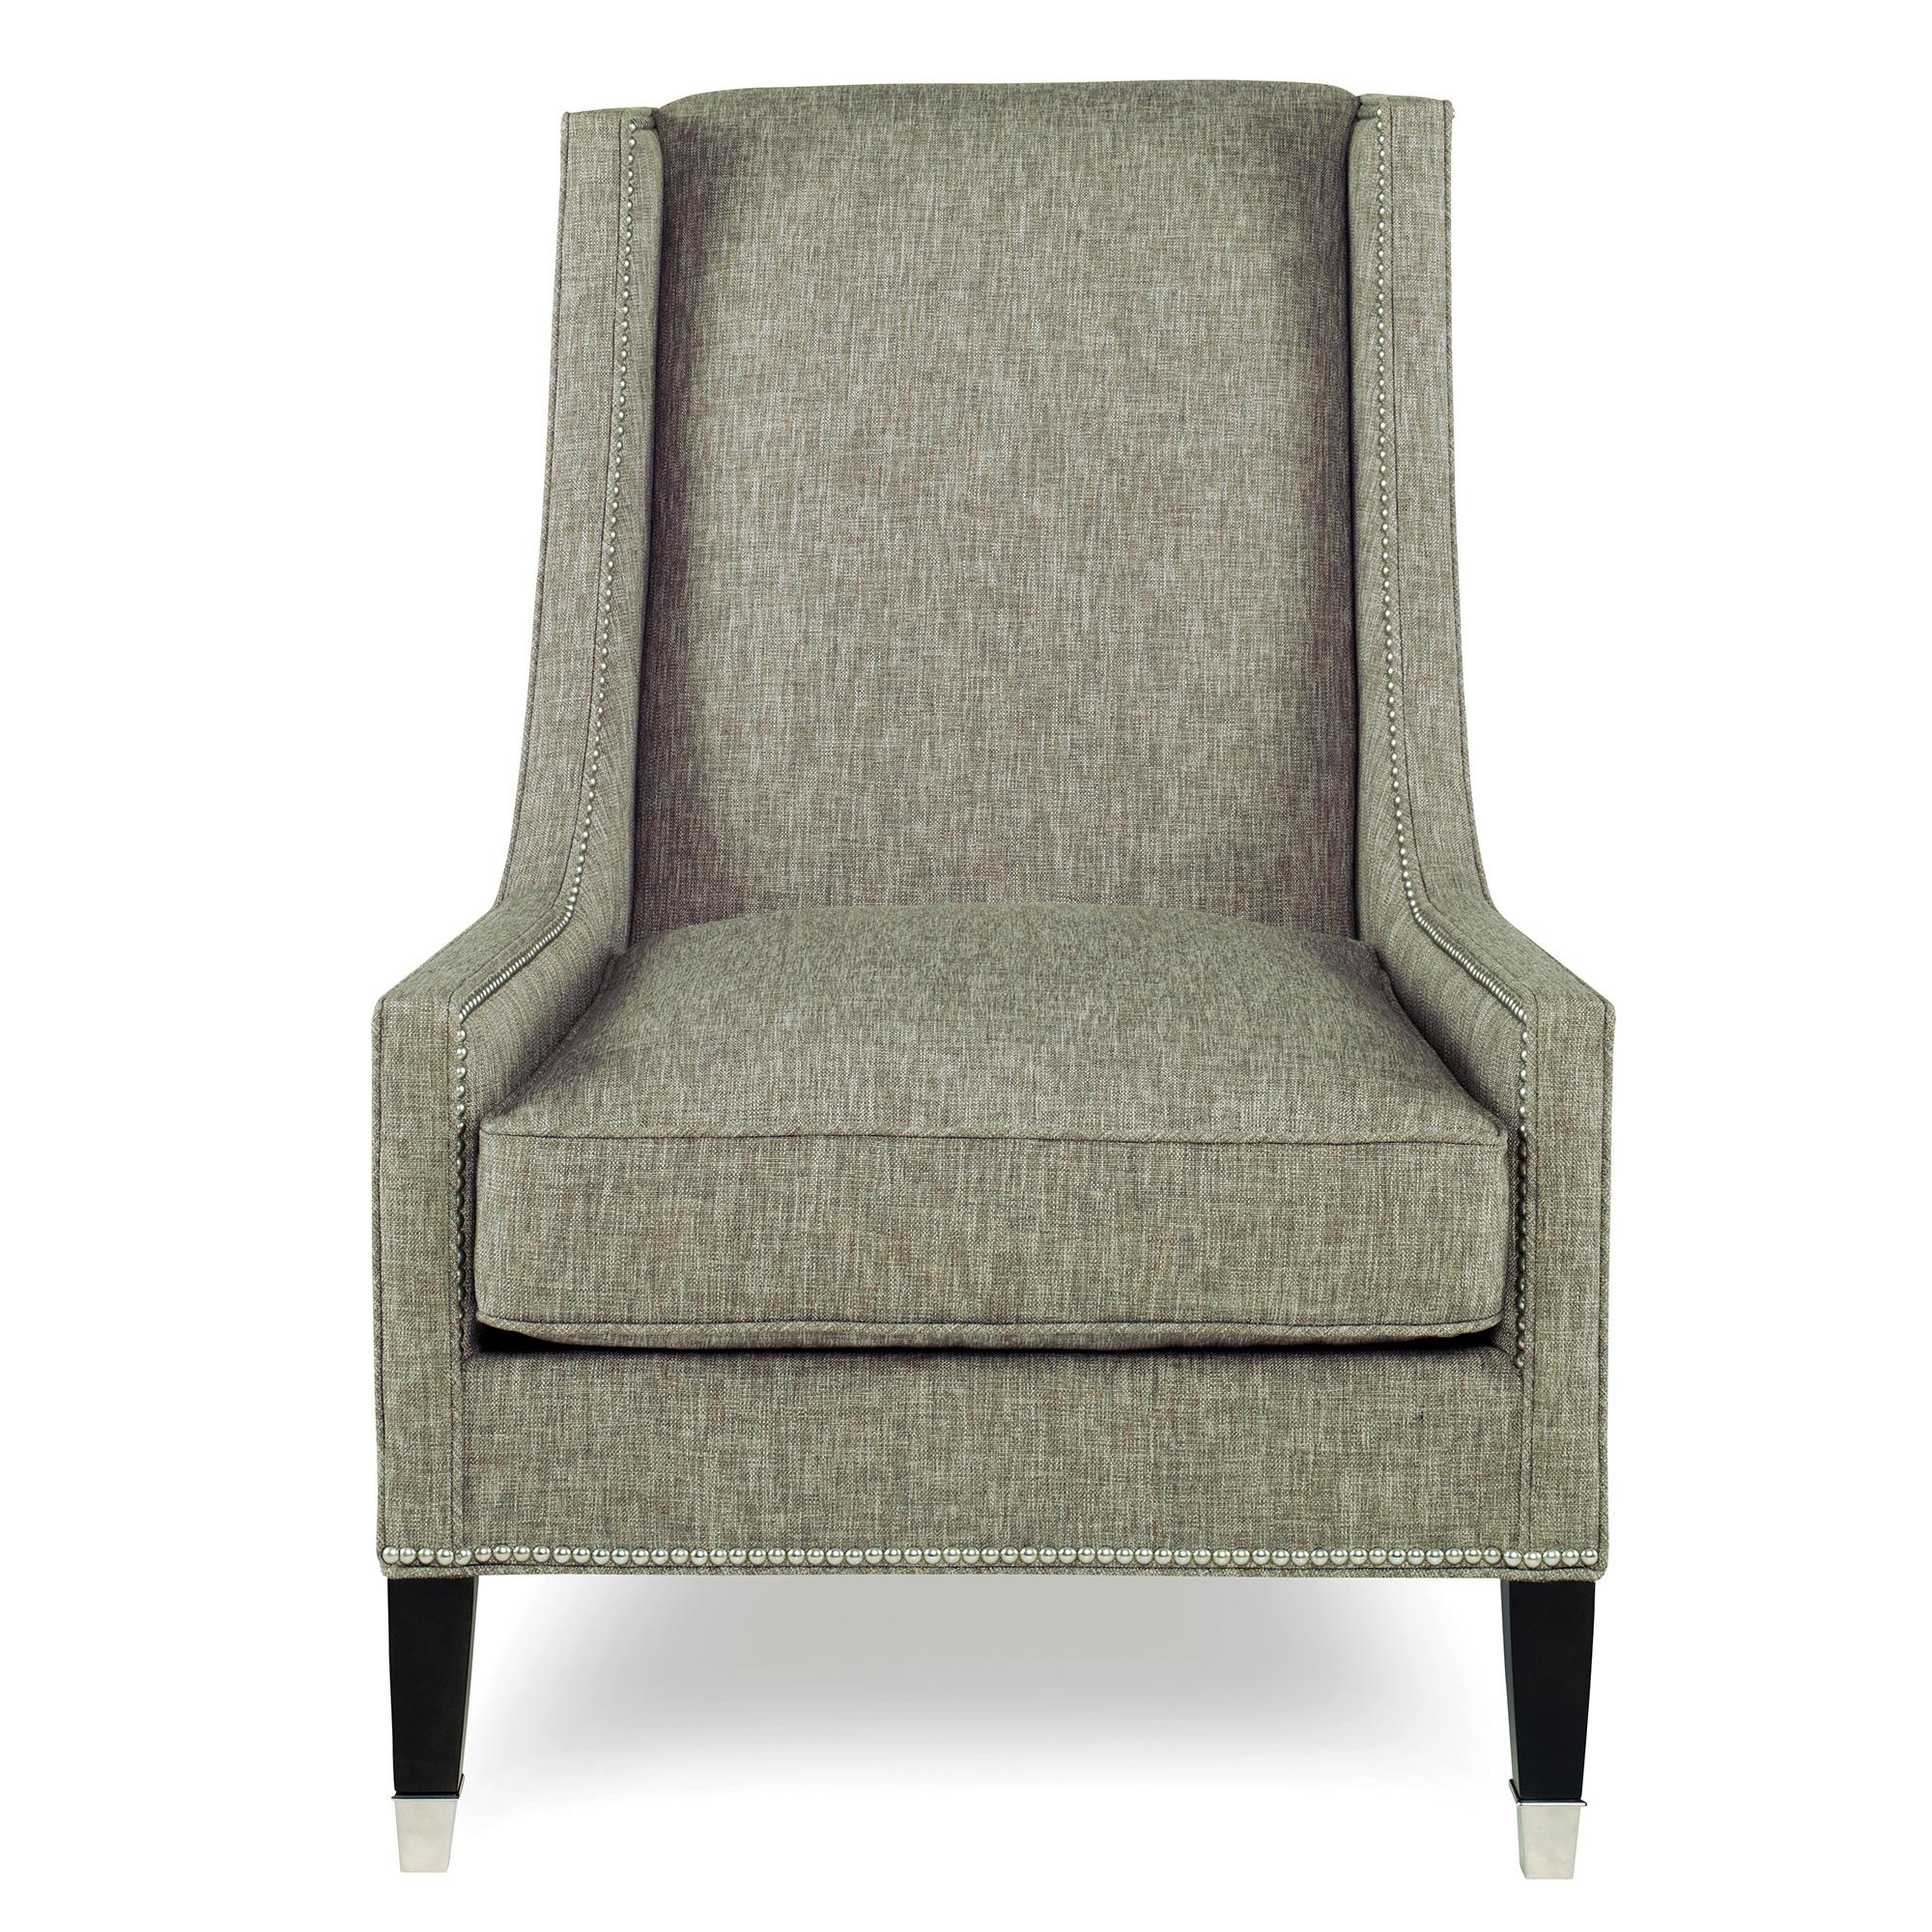 Tall Navarre chair (B203PN) upholstered in Kravet 32959.21, platinum nailheads. Leg in flannel finish with nickel ferrule. Made in the USA.

Ready to ship.